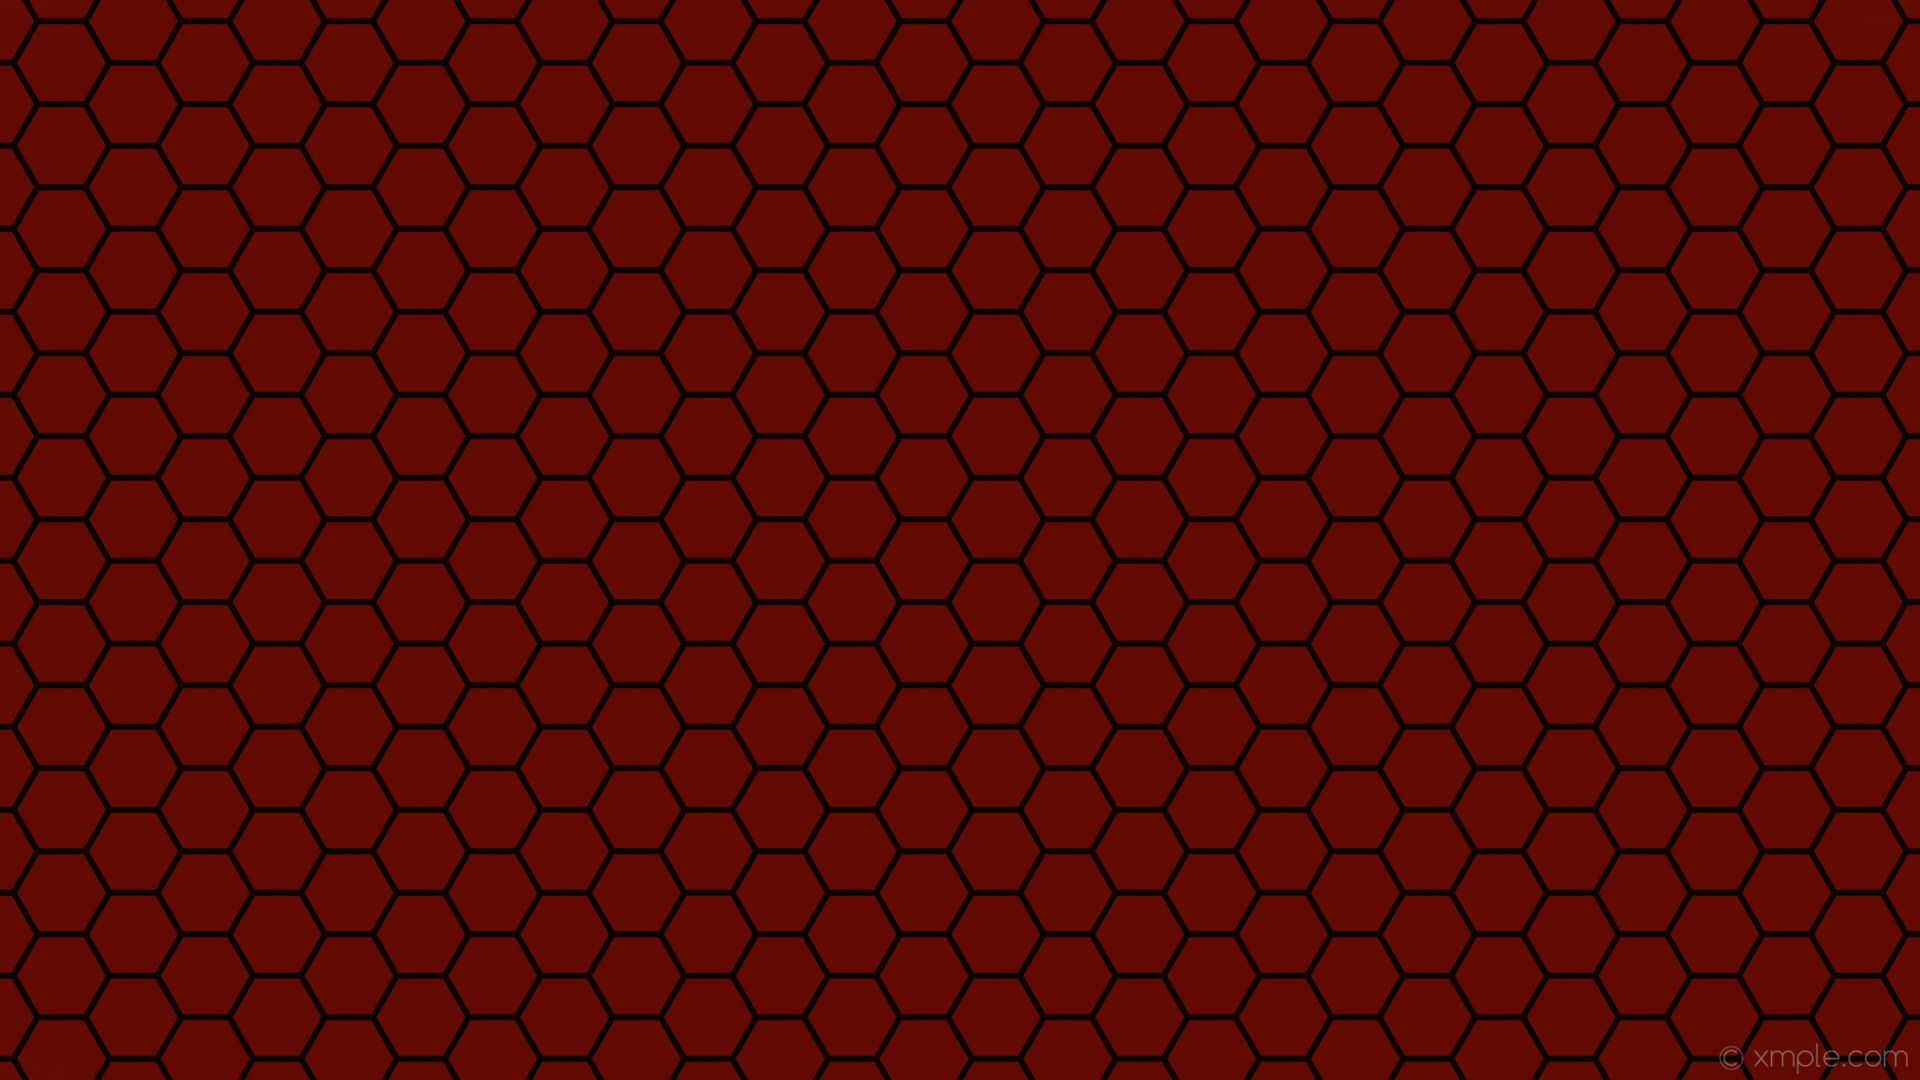 1920x1080 Red and Black Honeycomb Wallpapers Top Free Red and Black Honeycomb Backgrounds